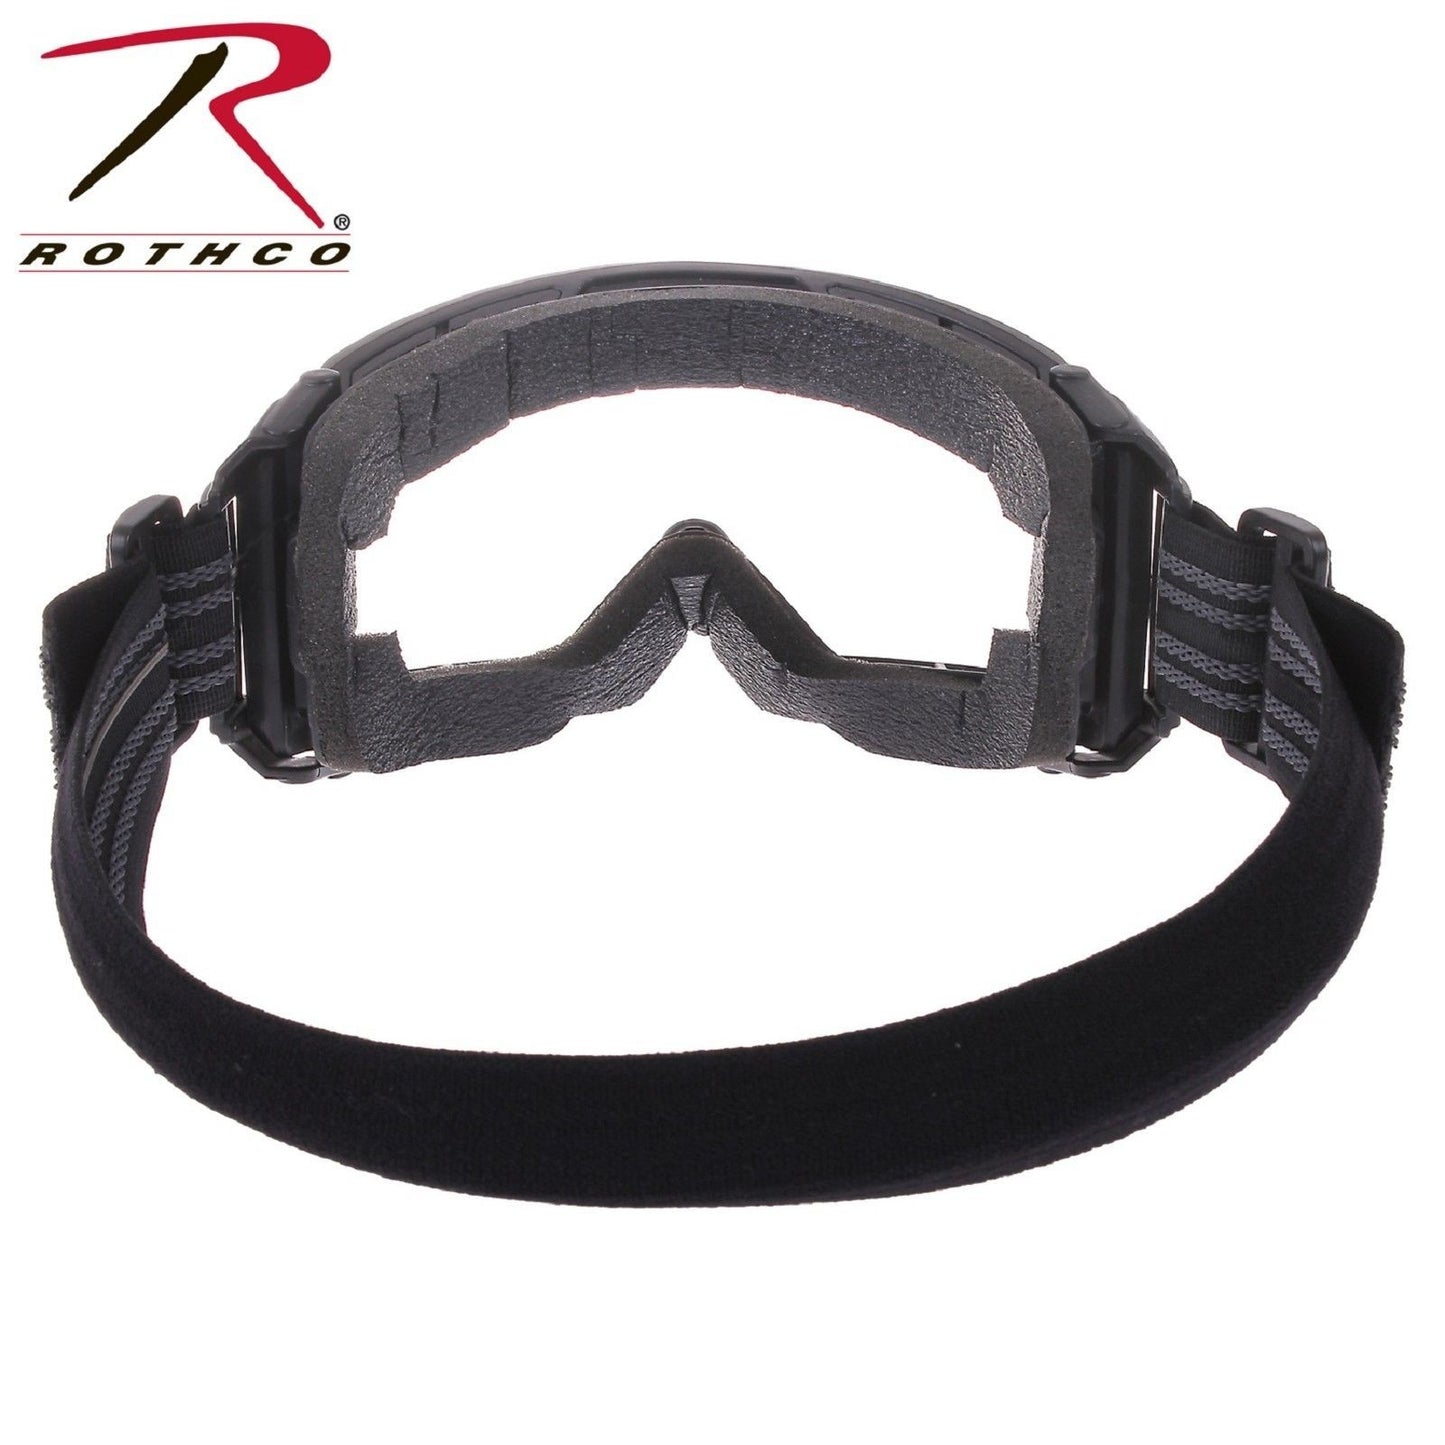 Rothco Over Glasses Tactical Goggles - Black Adjustable Airsoft Goggle